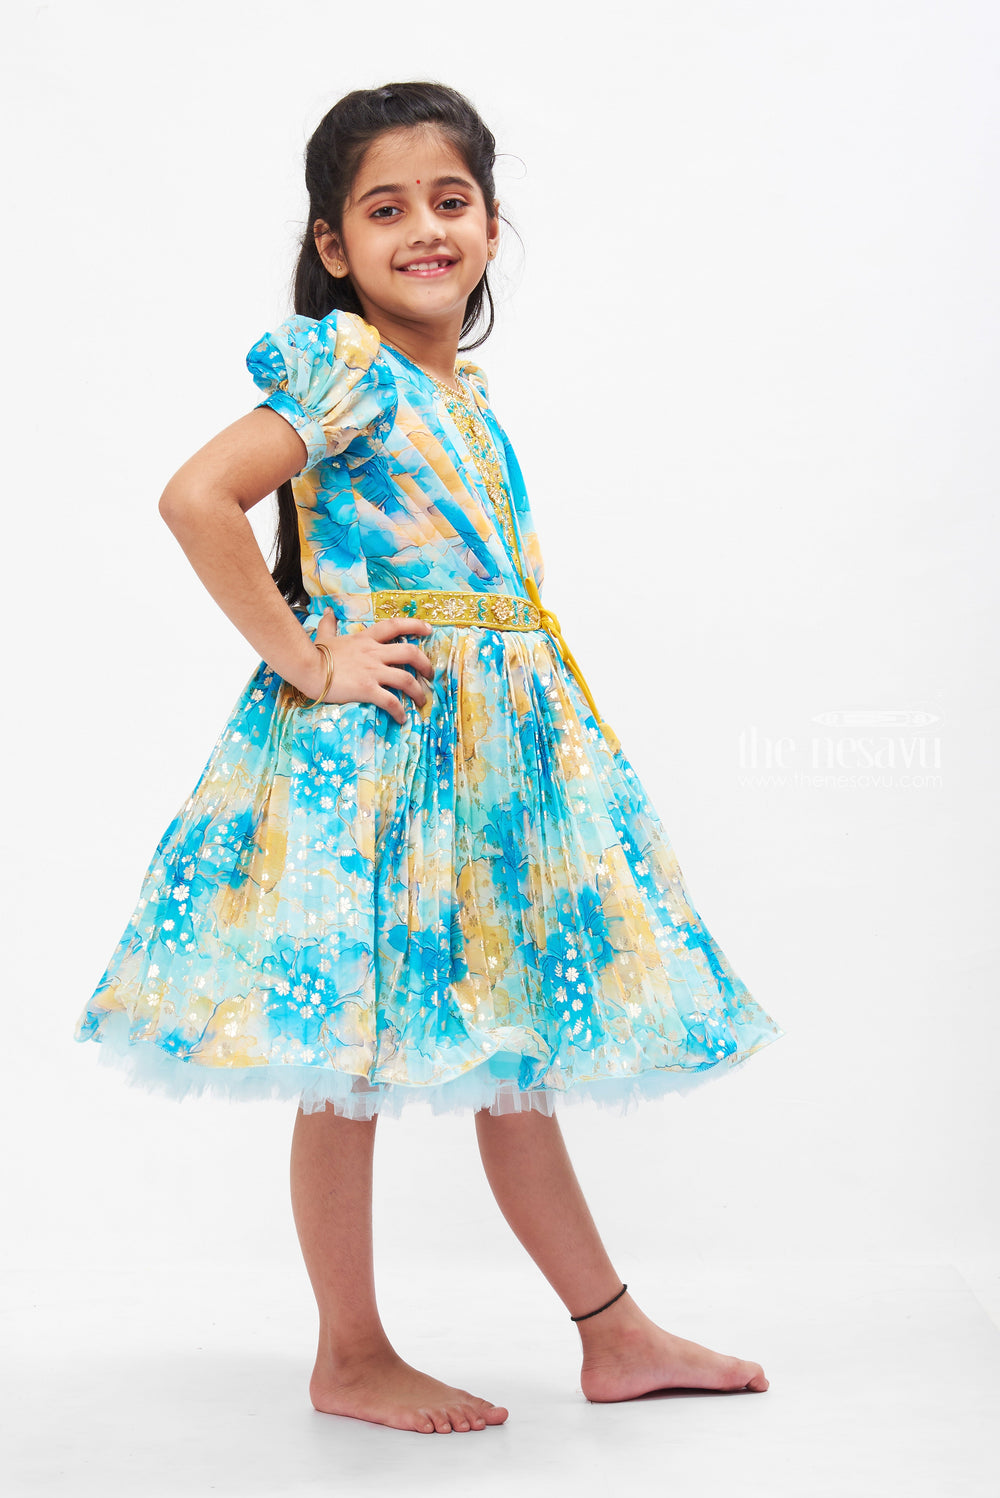 The Nesavu Silk Party Frock Enchanted Garden Silk Party Frock in Blue and Yellow Nesavu Blue & Yellow Floral Silk Frock for Girls | Stone Embroidered Party Dress | The Nesavu